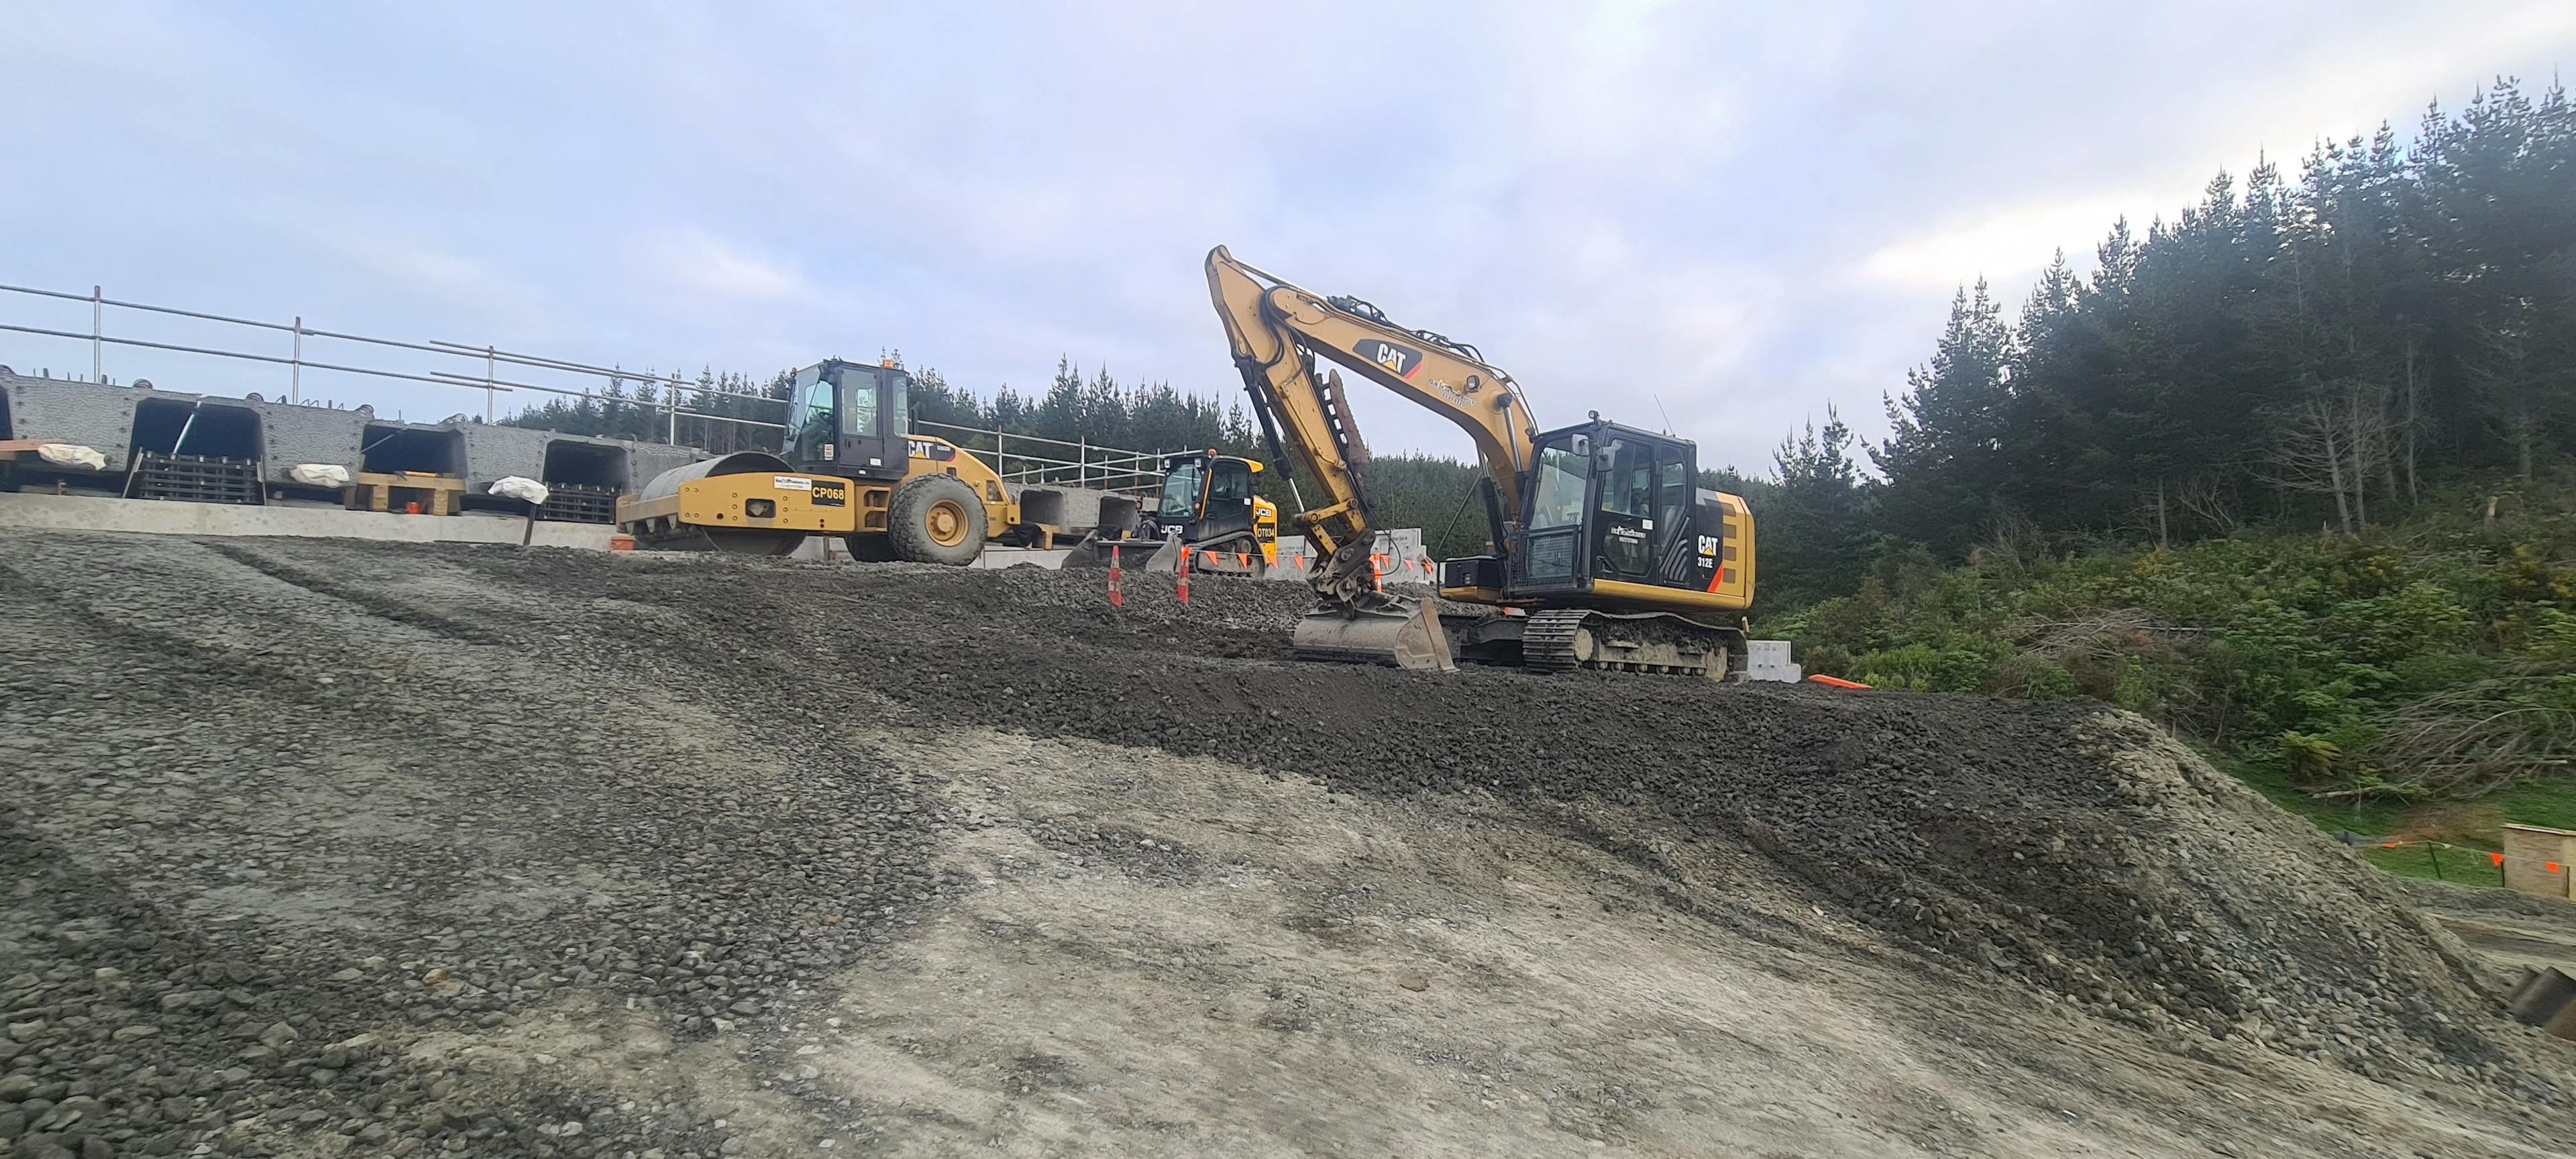 Let us lay the foundation for your project's success. Foundation is one of the most important jobs, and on big sites, it can dictate whether or not the job is finished on time. We have 10+ years of reliability. Call us now!